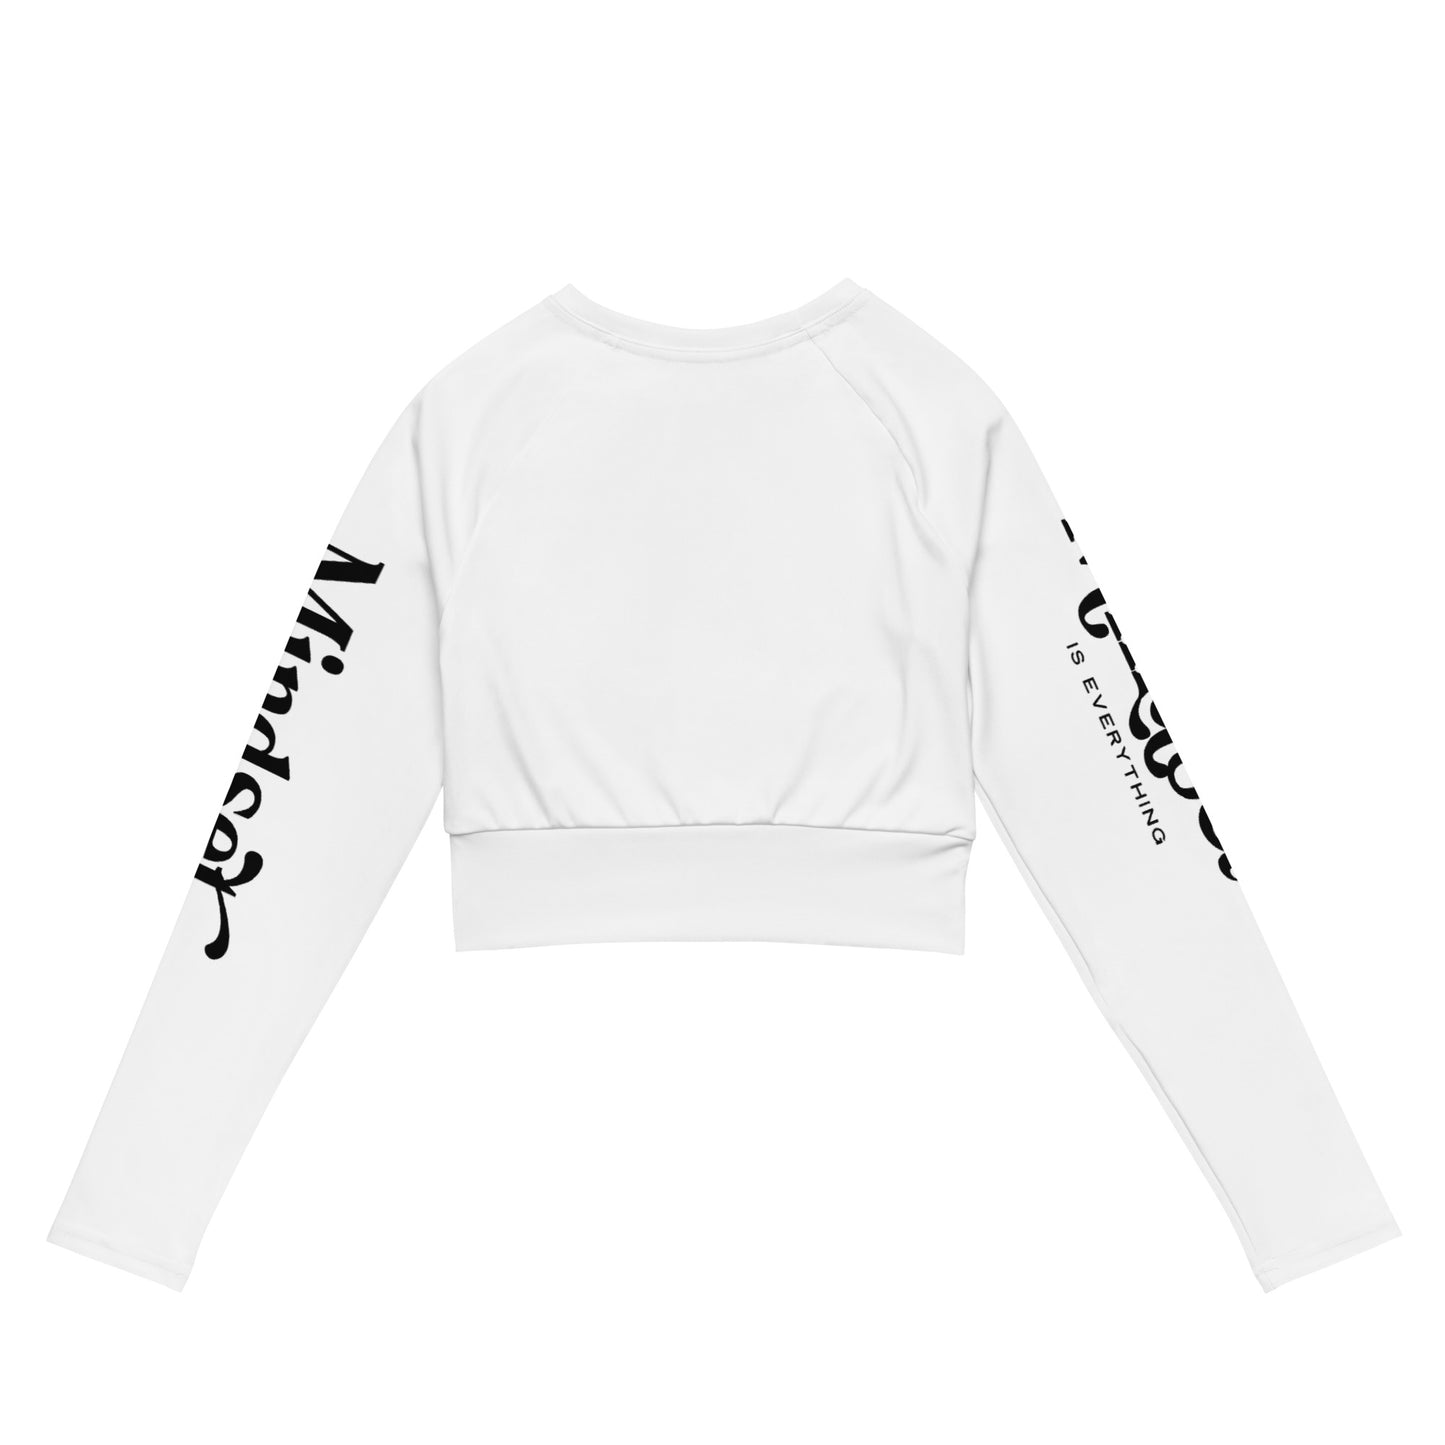 "My Mindset is My Superpower!" long-sleeve crop top